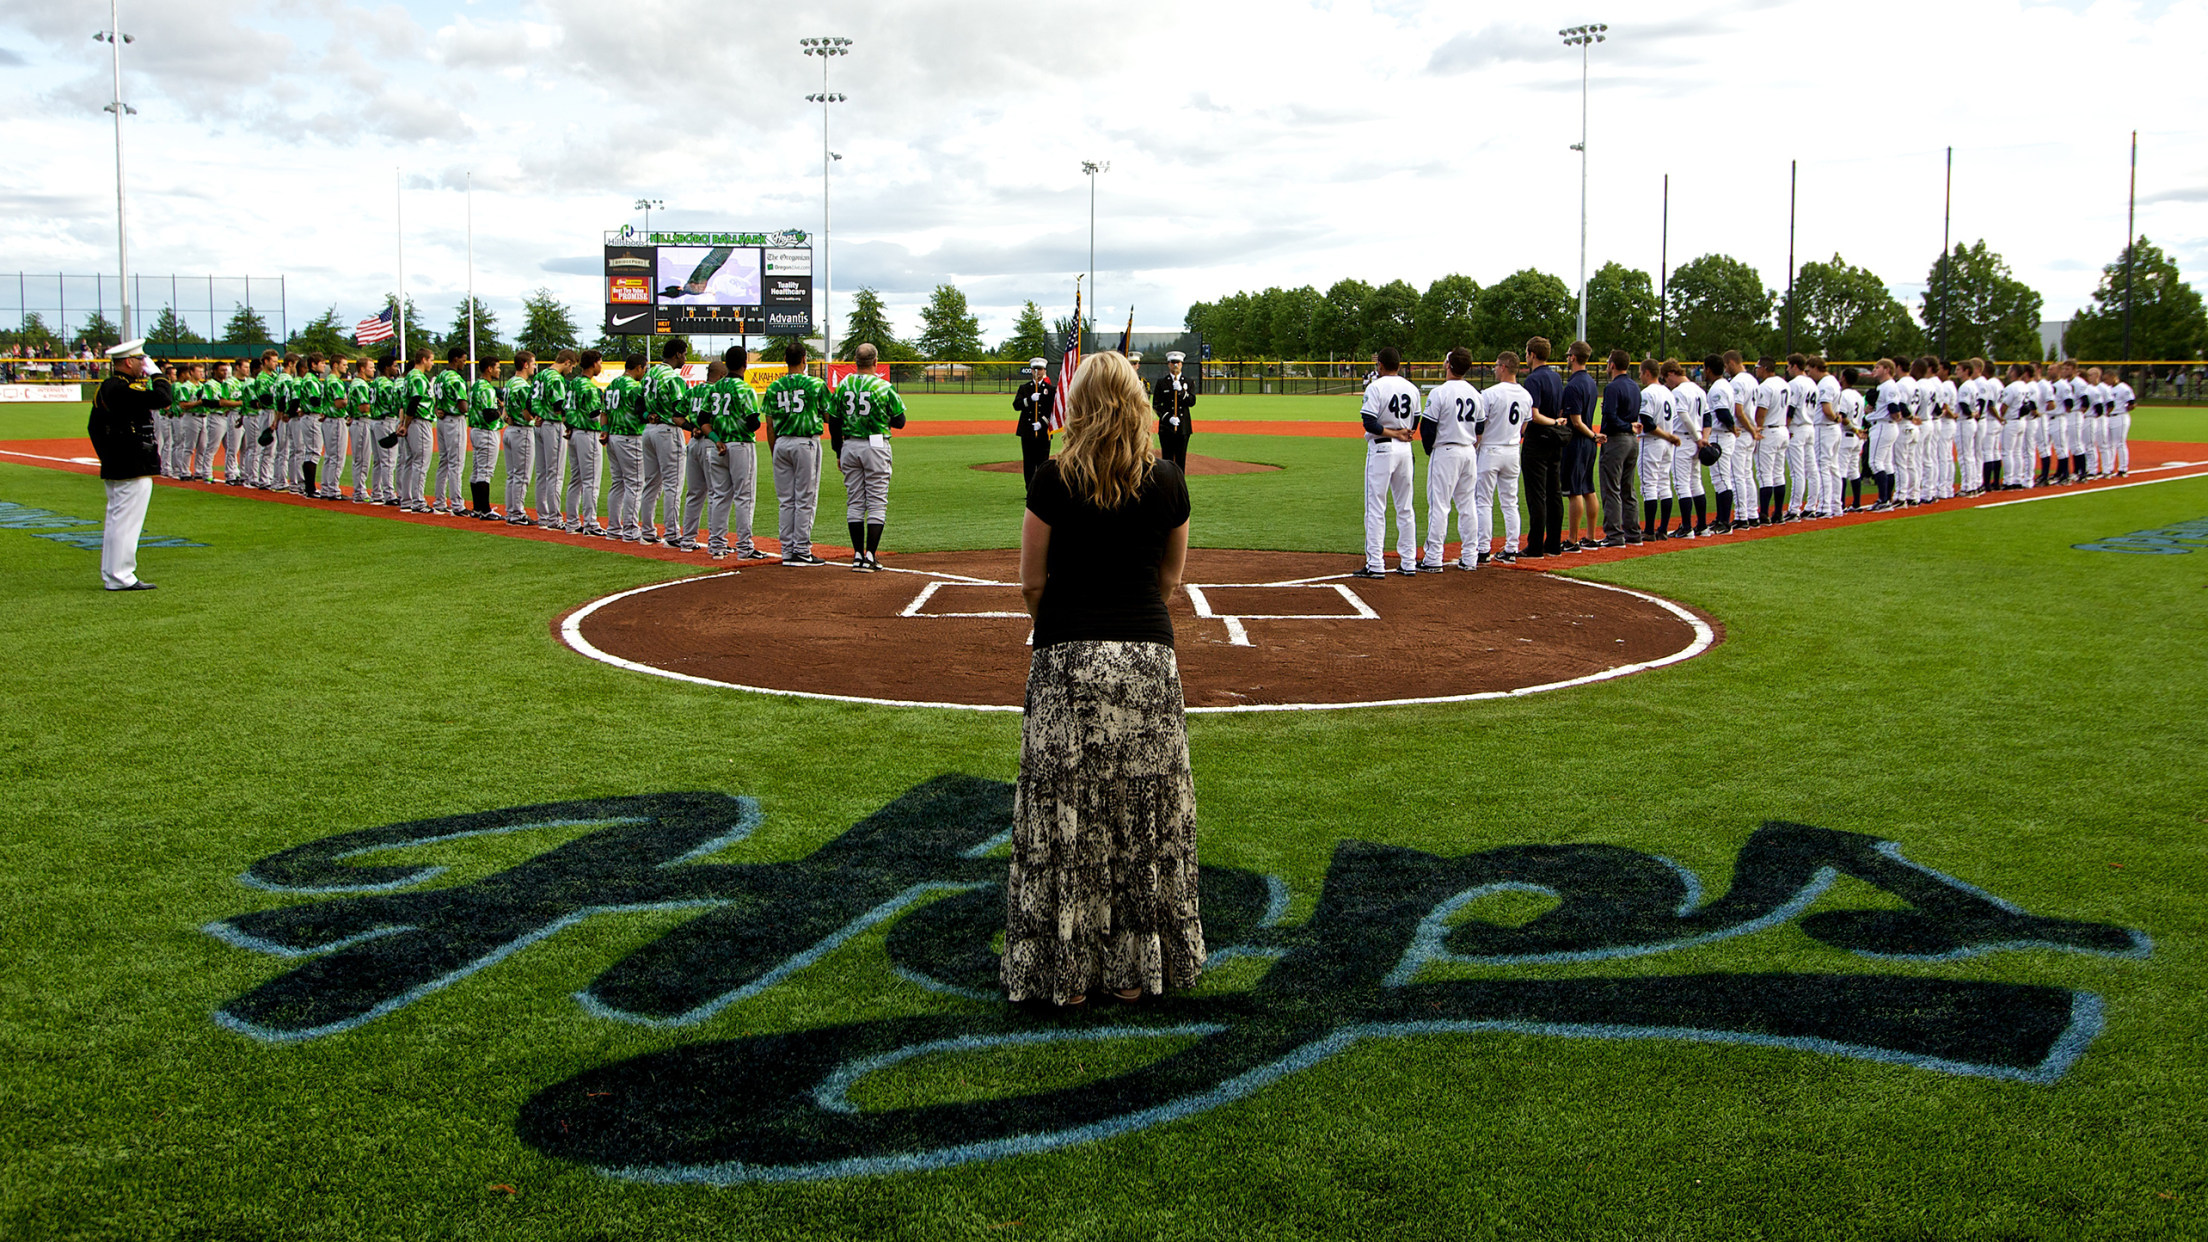 The Hillsboro Hops Baseball Team Is Staying In The Oregon City [Video]